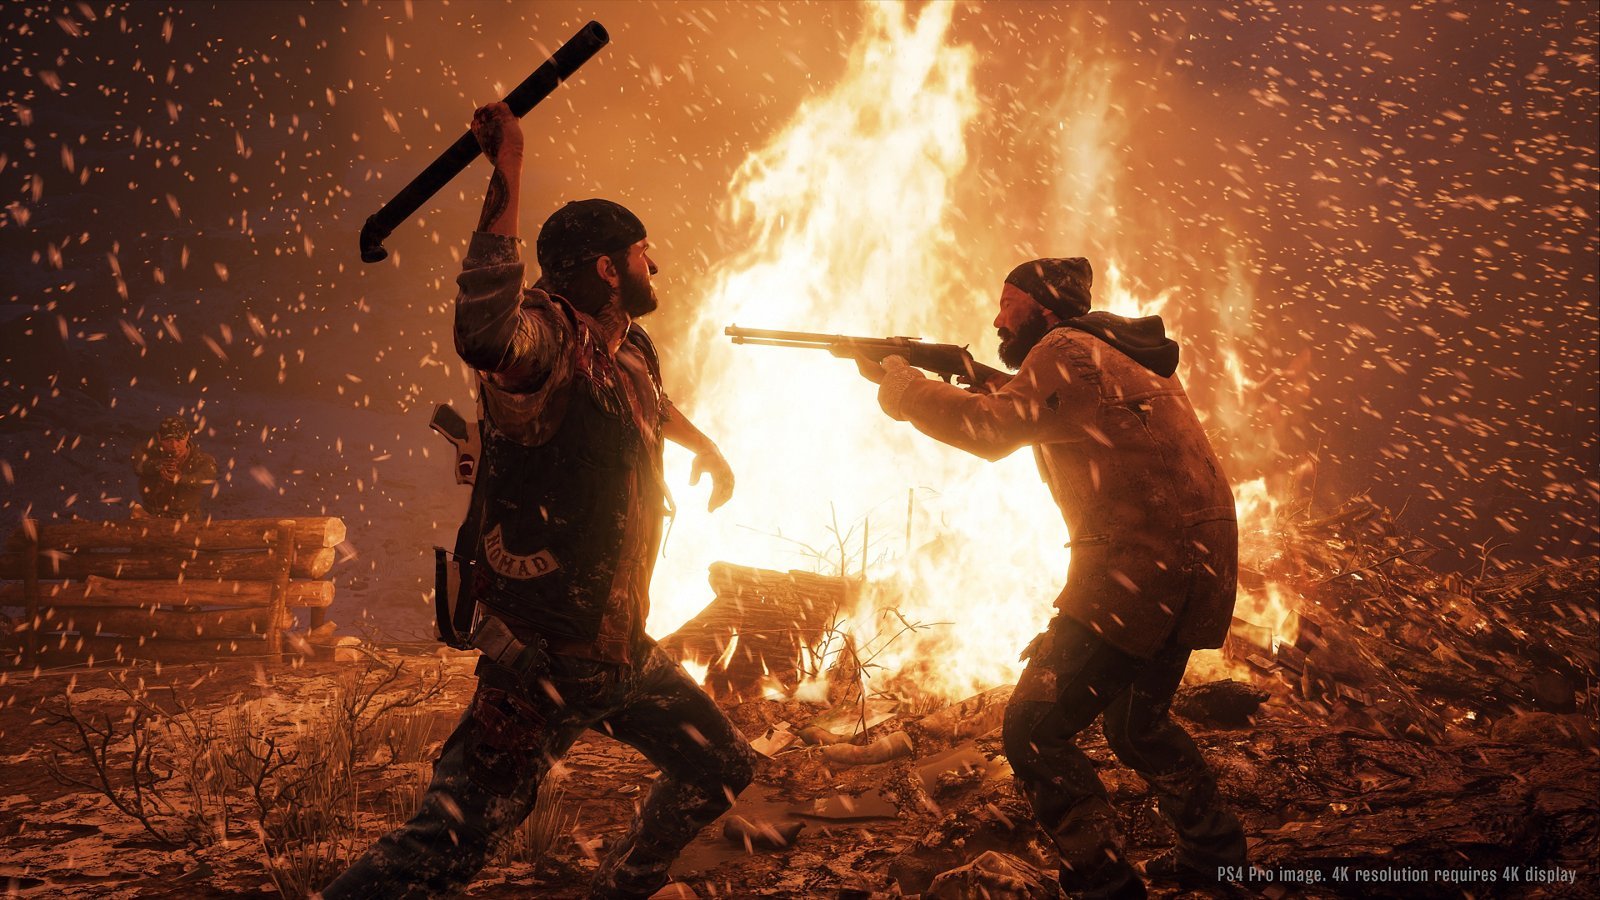  Days Gone 2’s shared universe would have had players surviving together as a community 